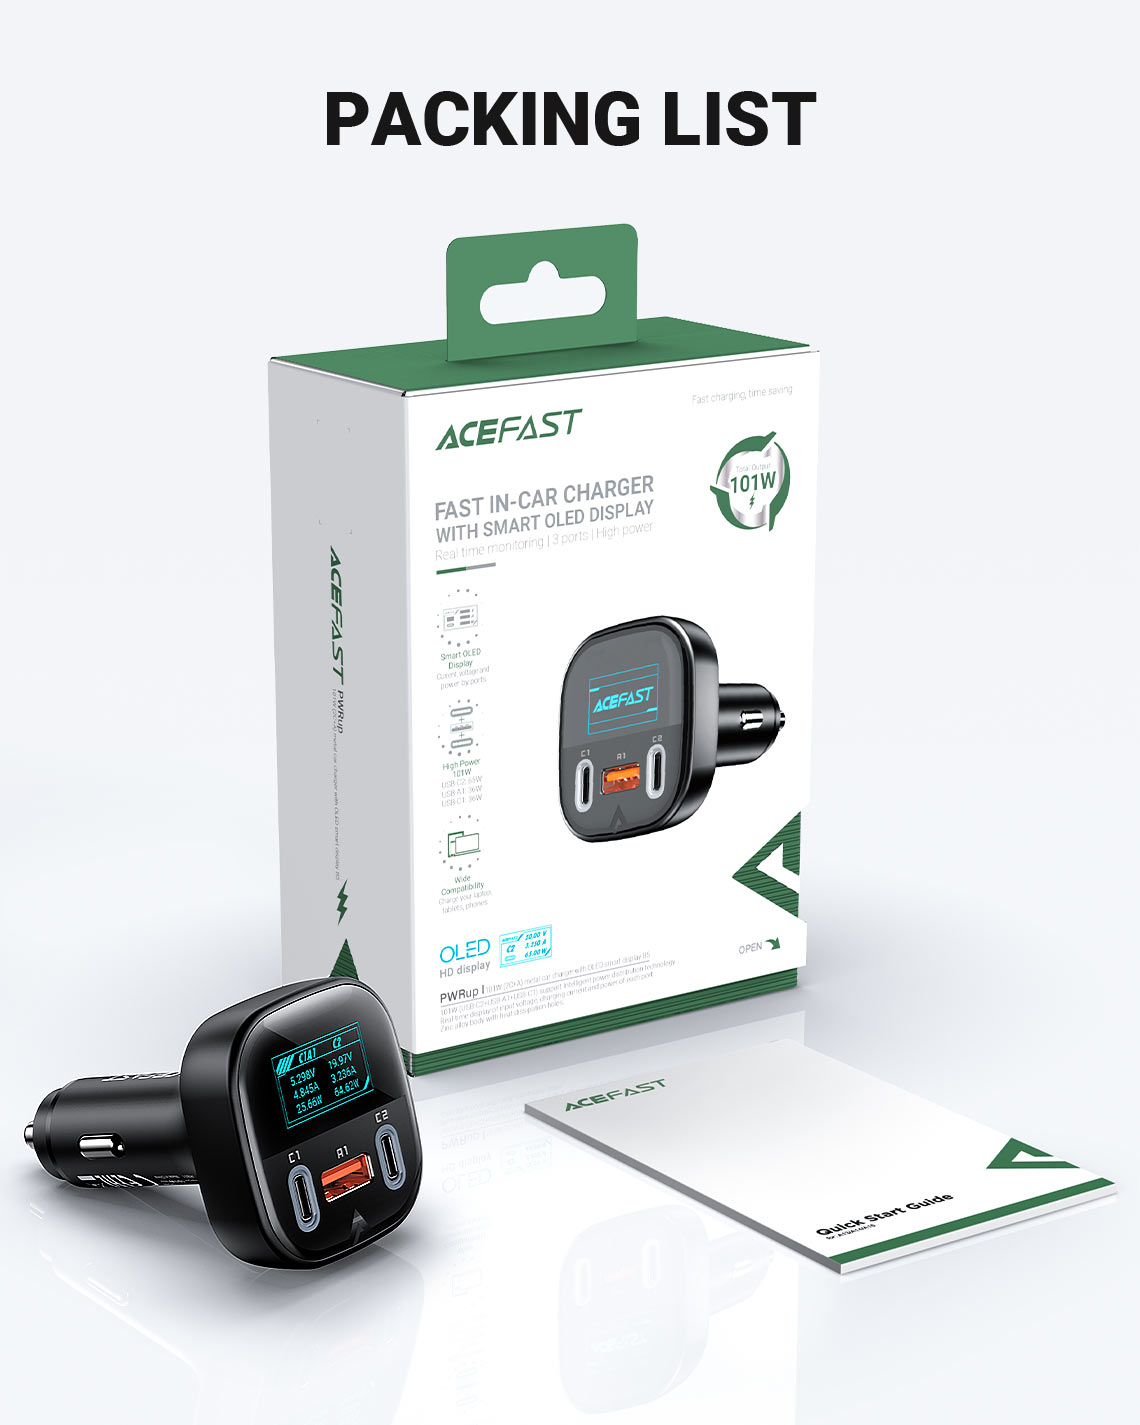 acefast b5 101w car charger packing list